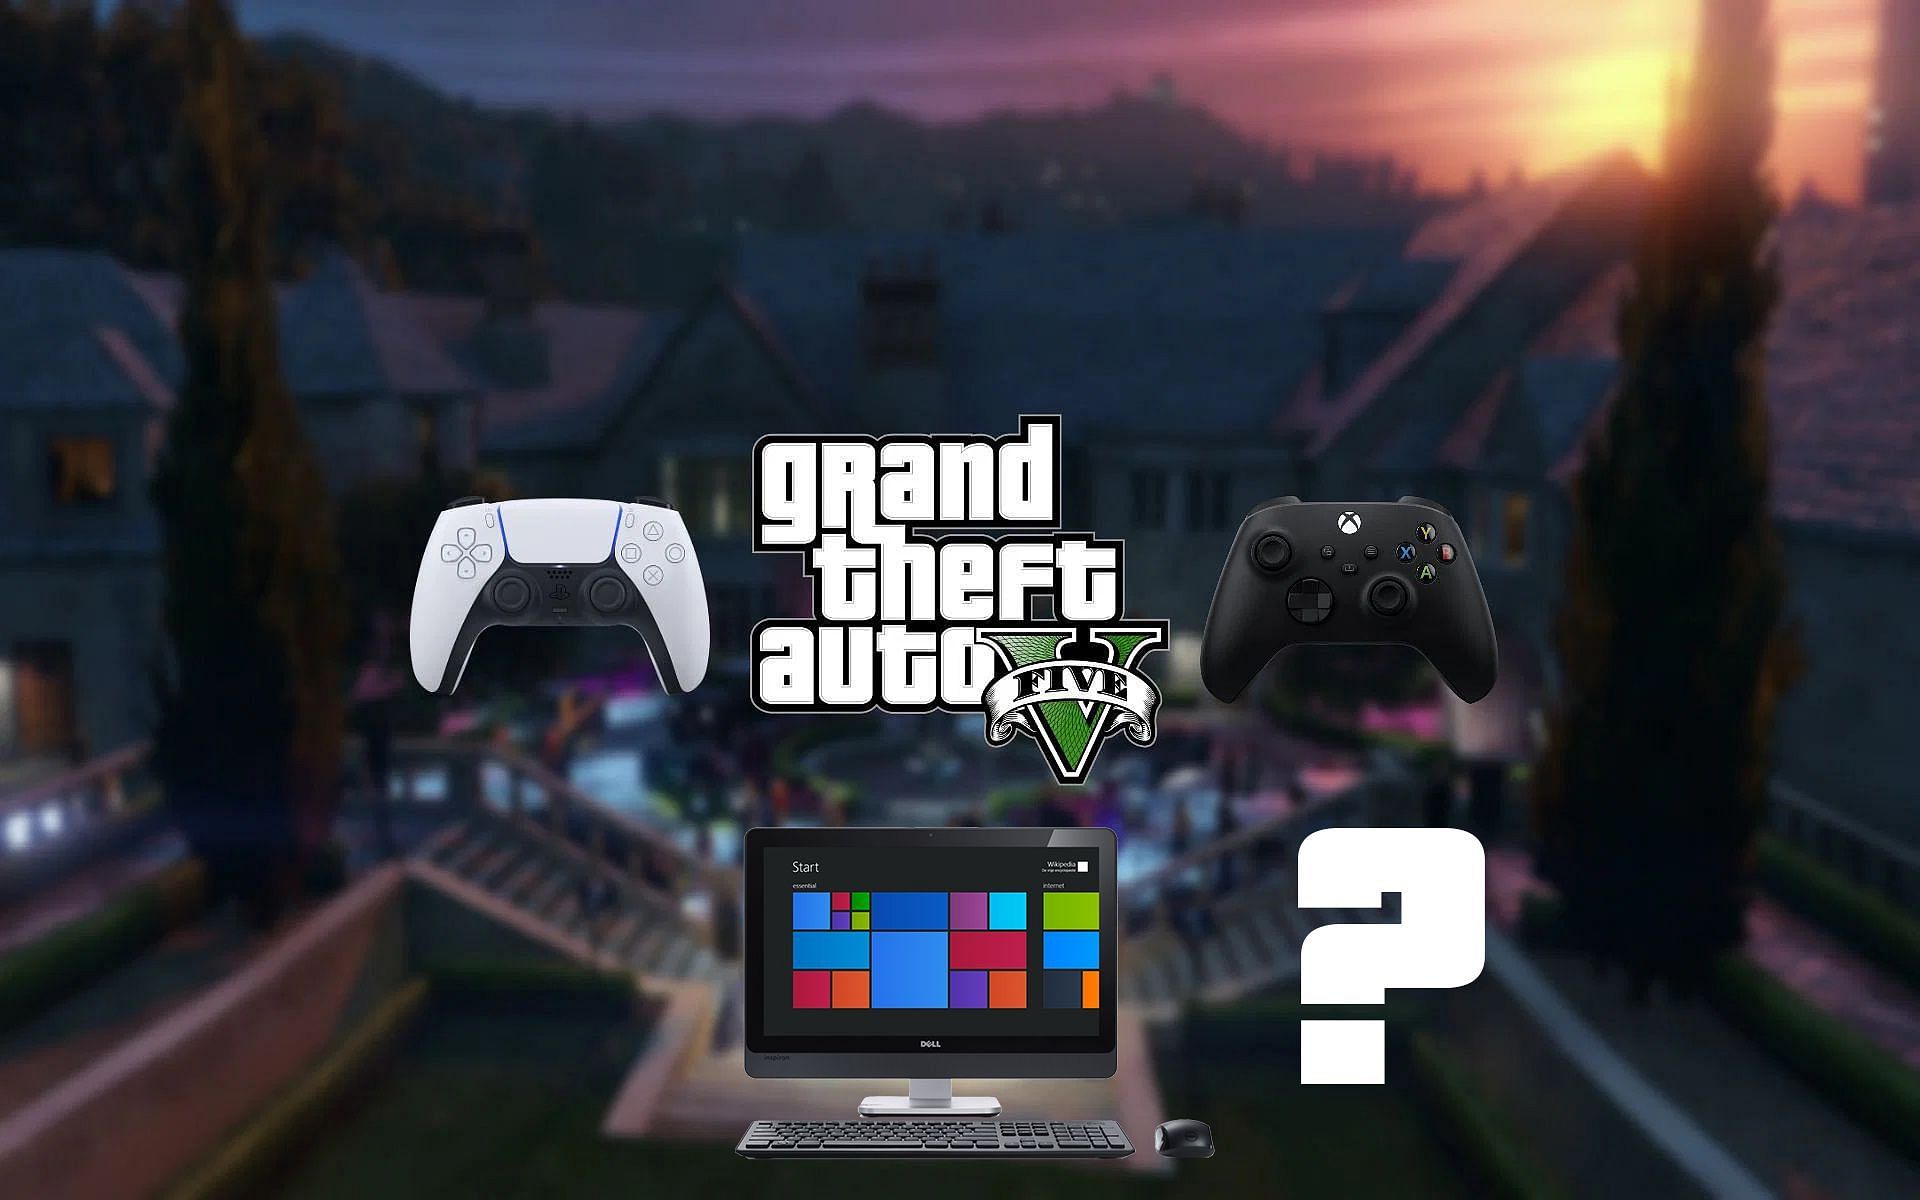 GTA 5 next-gen edition coming to PC will please some fans (Image via Sportskeeda)